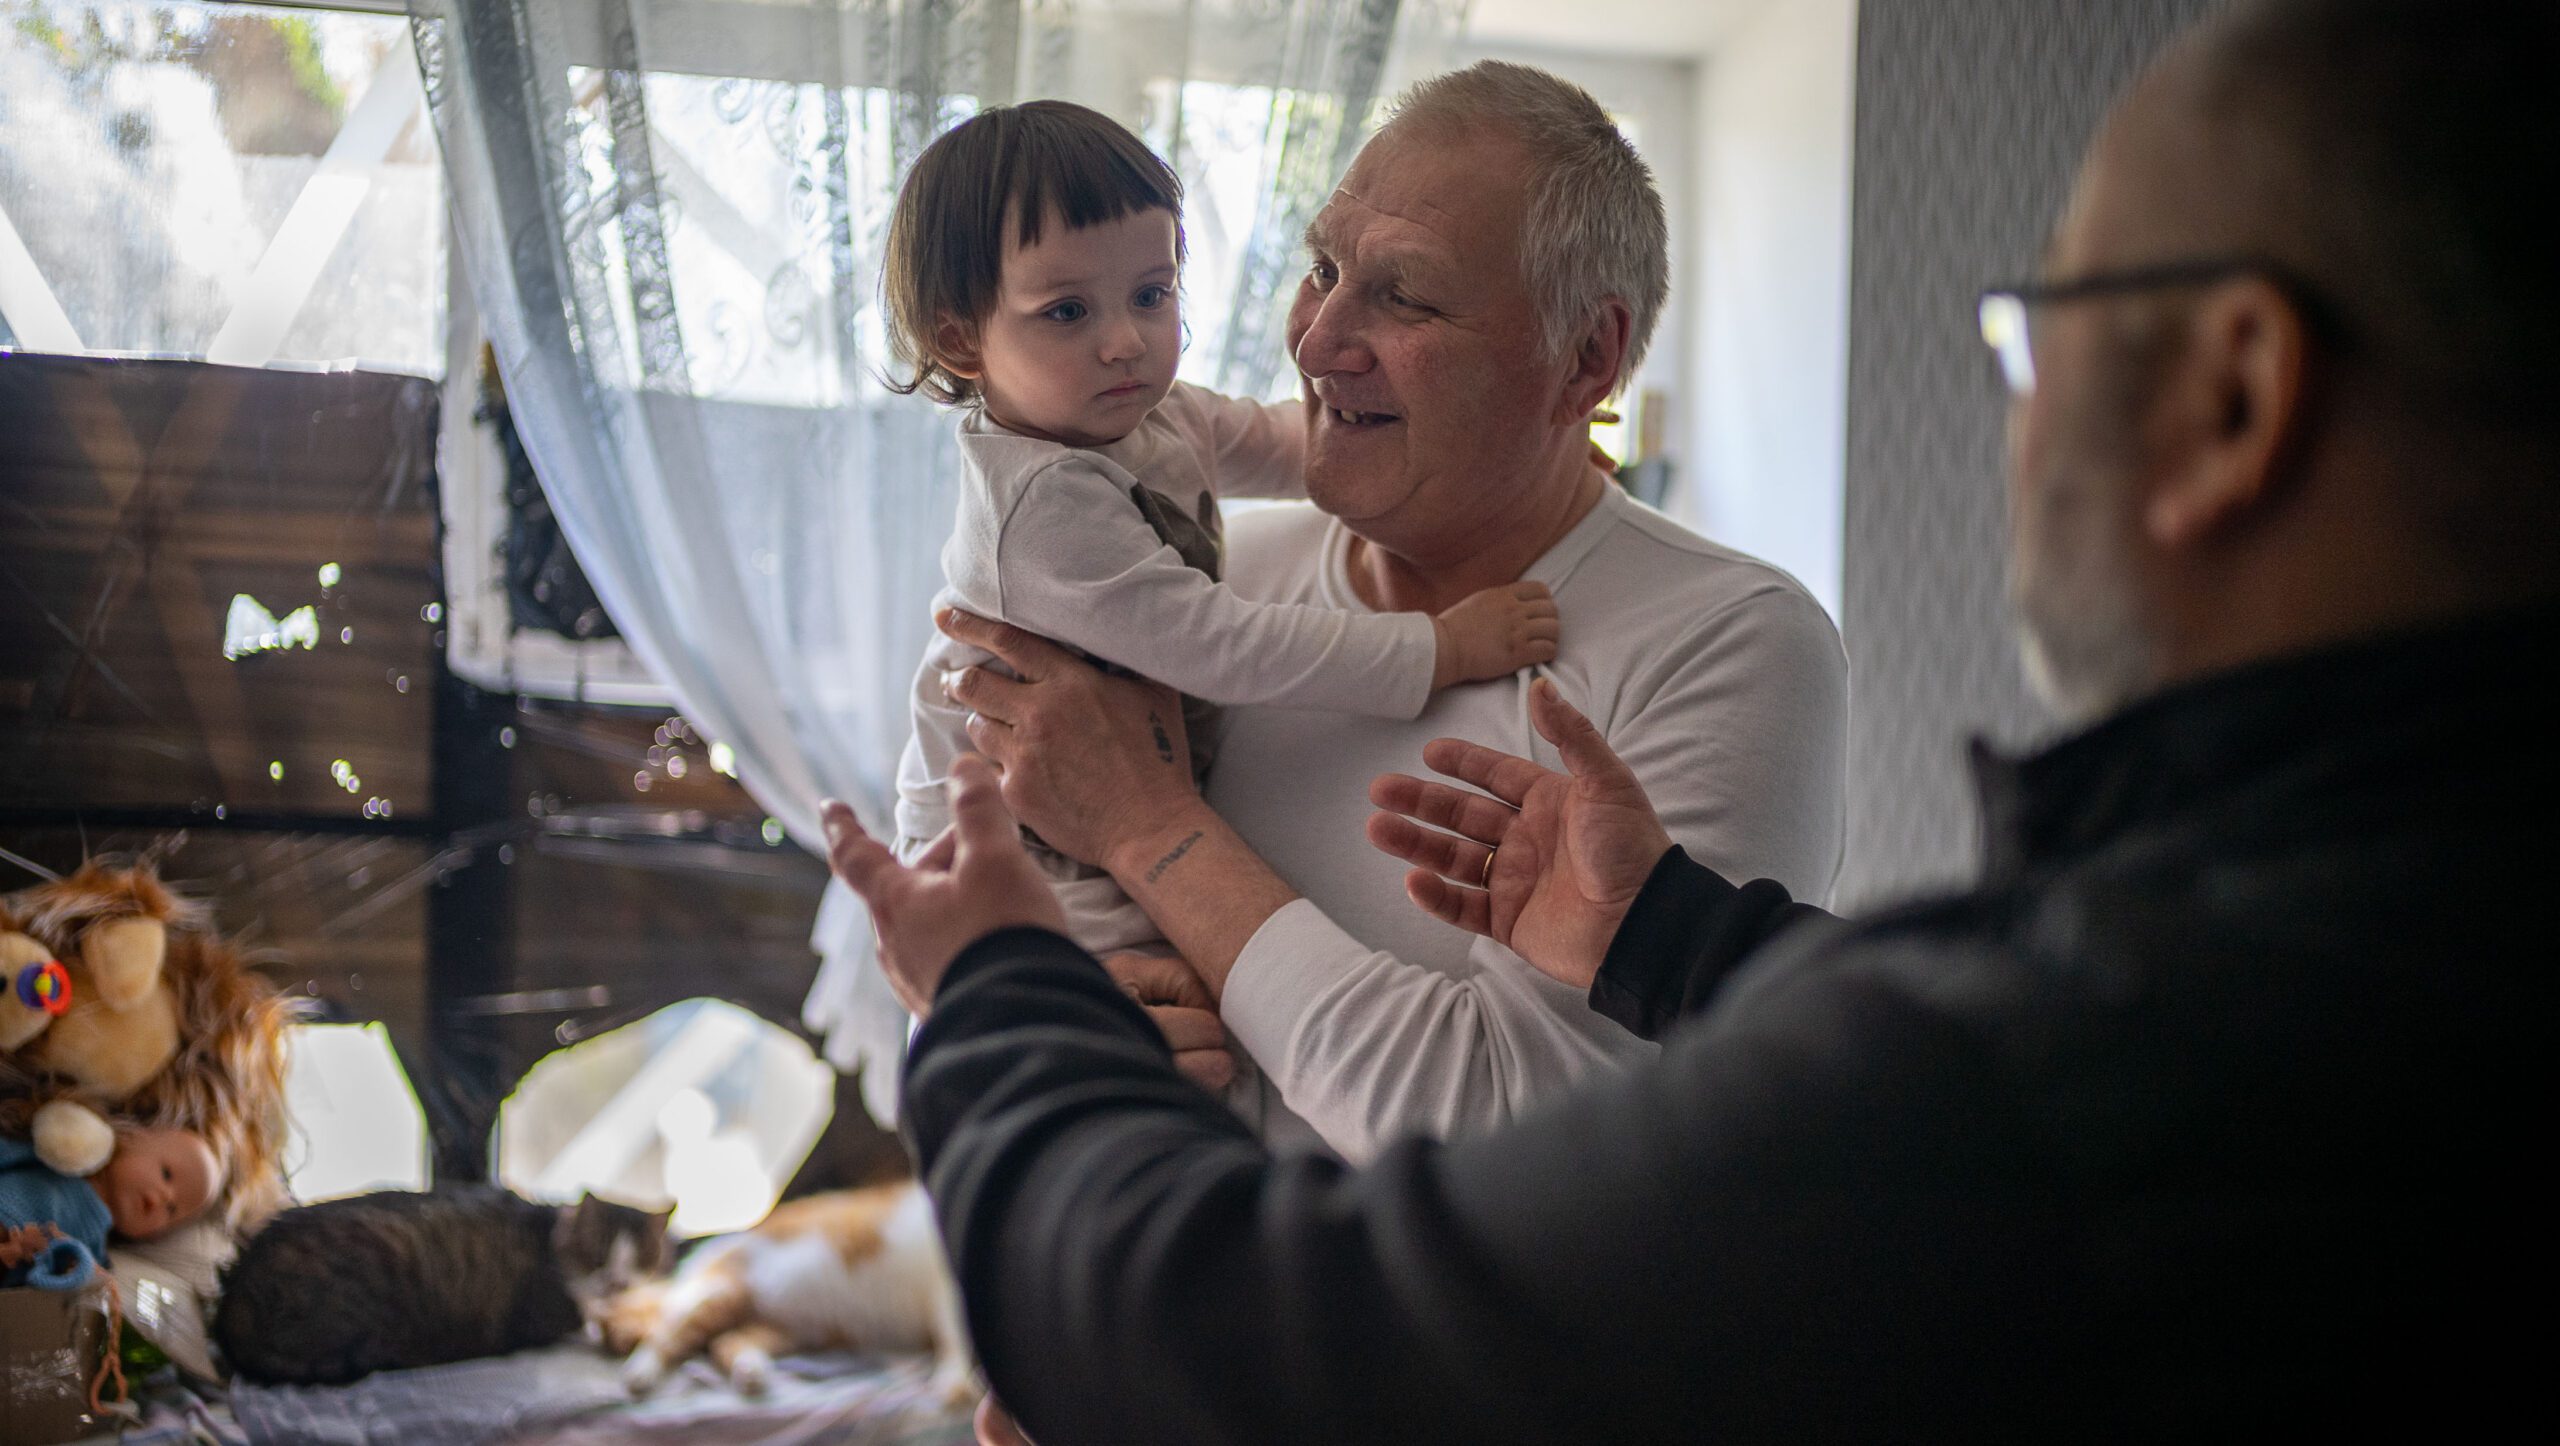 May 2, 2022Vinnytsia, UkraineAnatoly from Kostyantynivka in Donetsk Oblast and his granddaughter are among the over 250 Internally Displaced People are living at the Vinnytsia No. 1 Center for Professional-Technical Education, a technical college. PHOTOGRAPH by ALAN CHIN